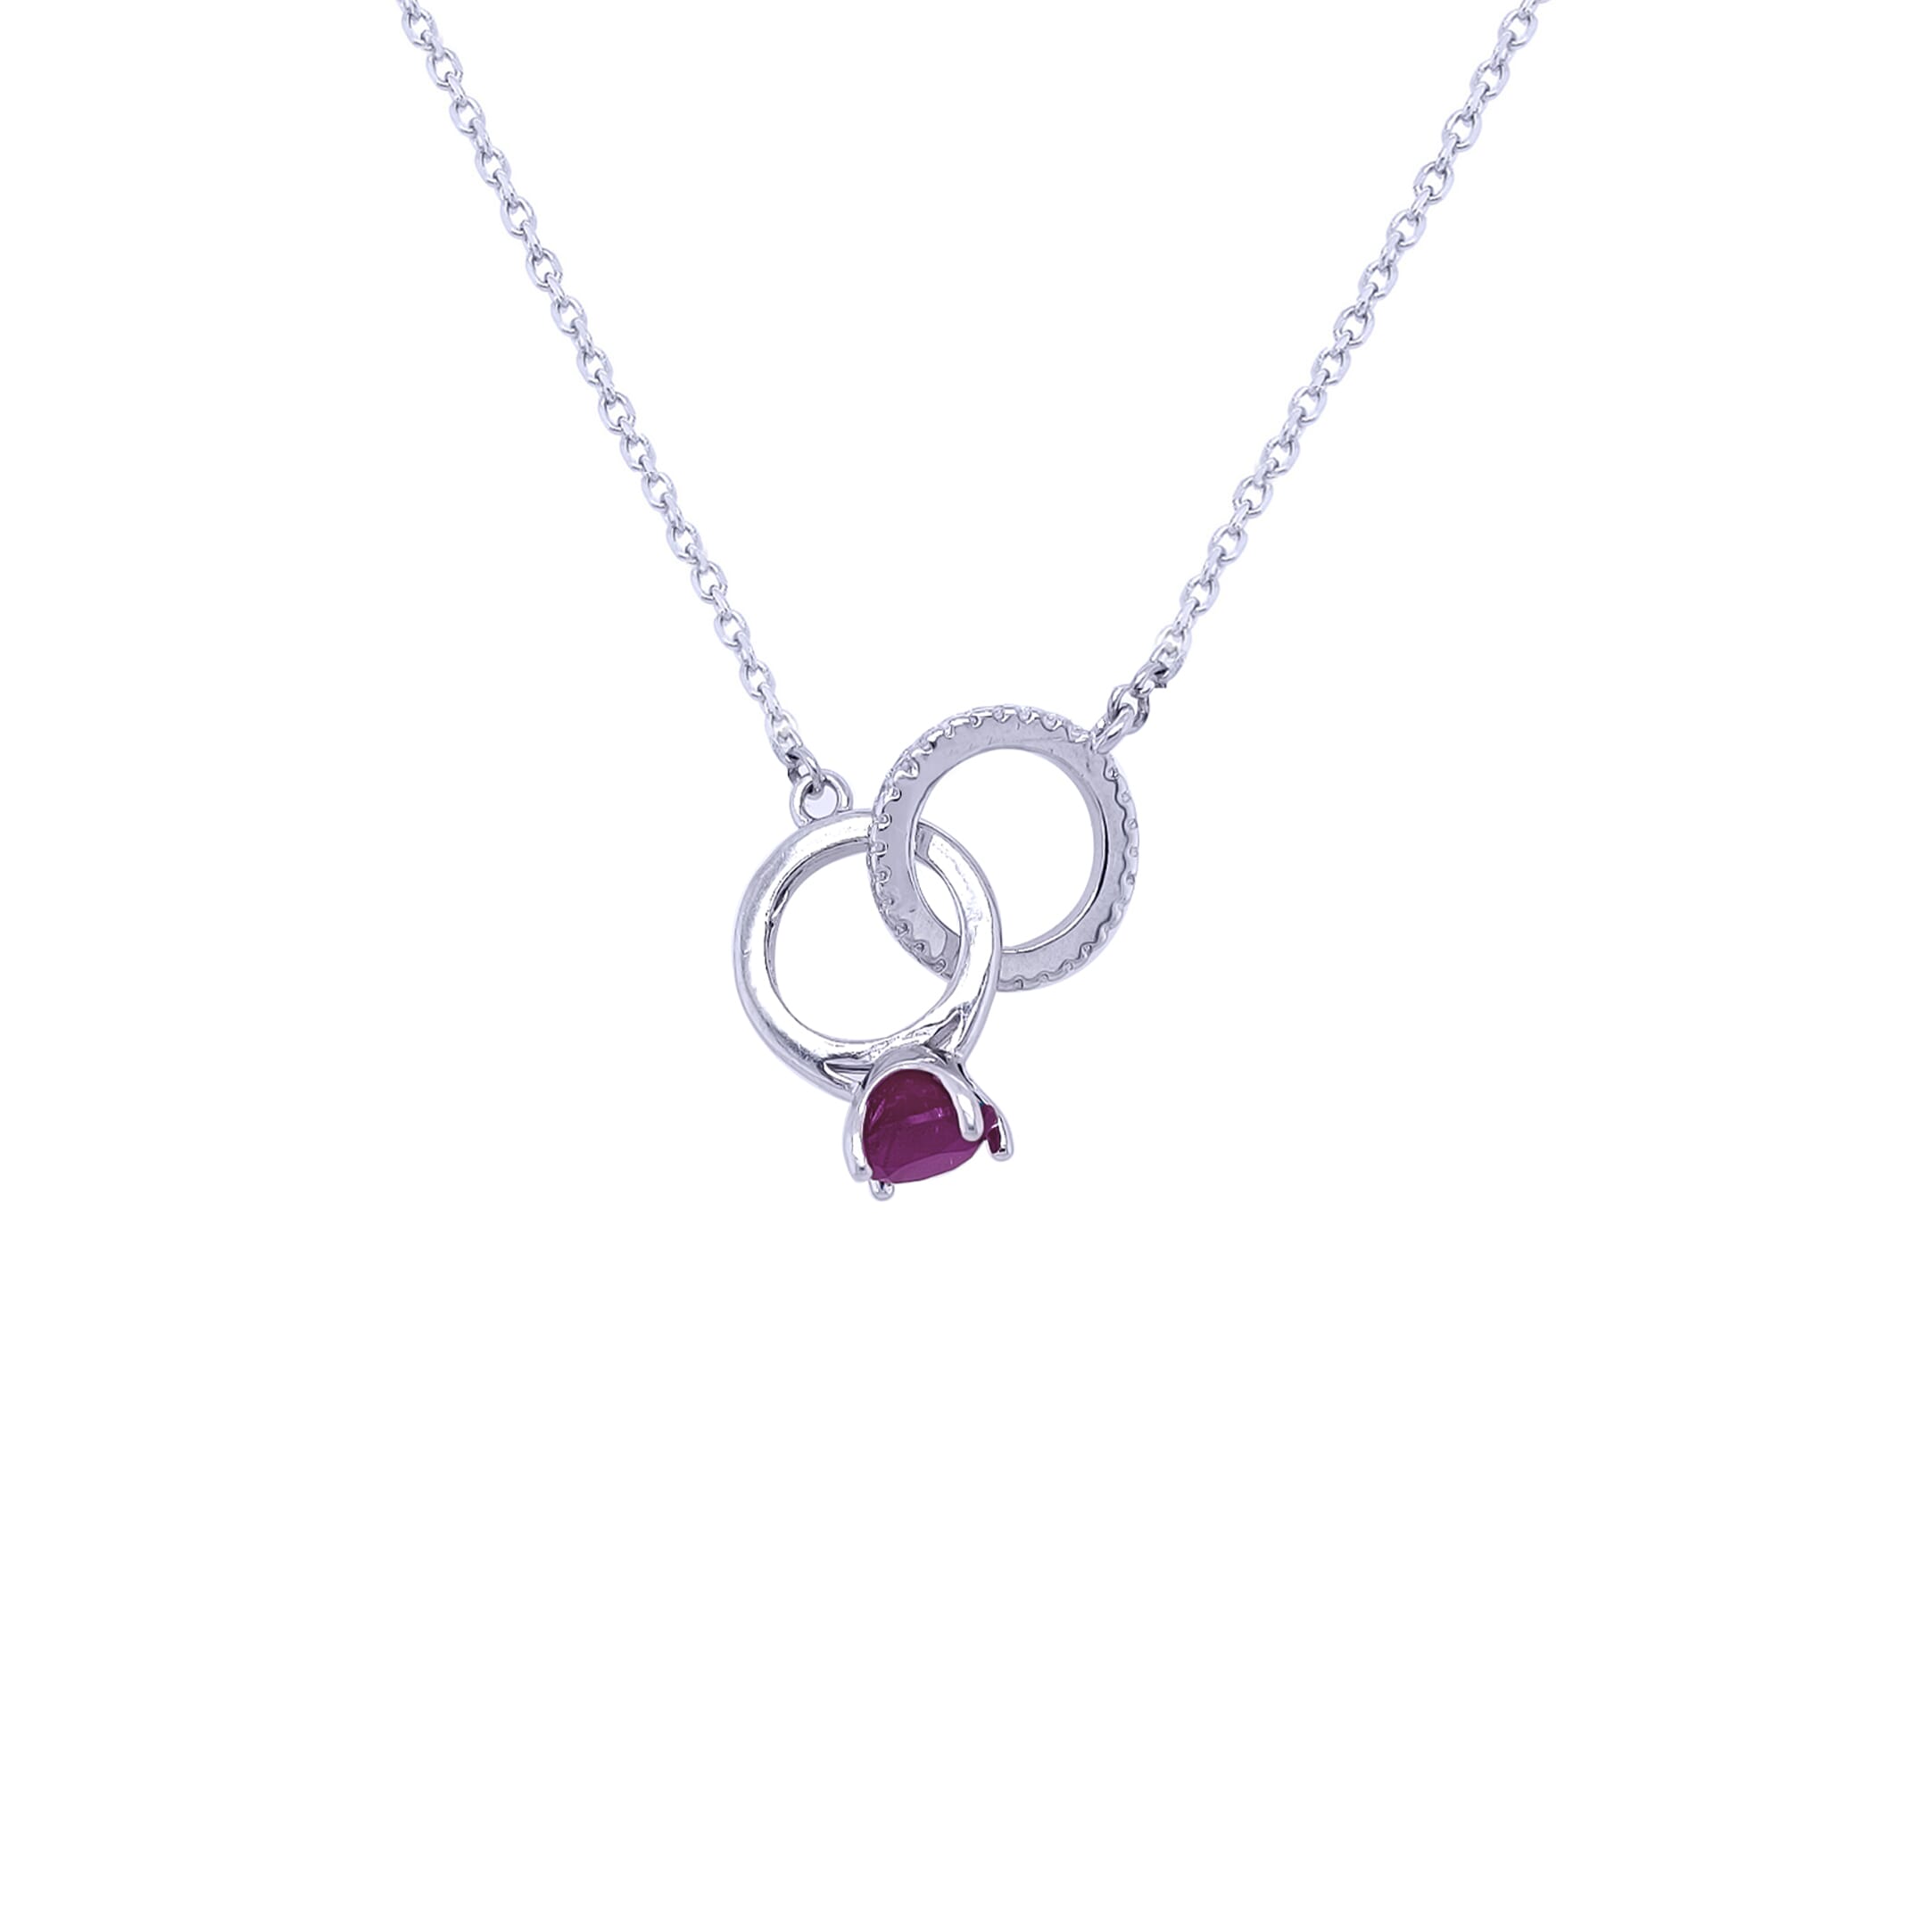 Asfour 925 Sterling Silver Necklace With Two Ring Pendant